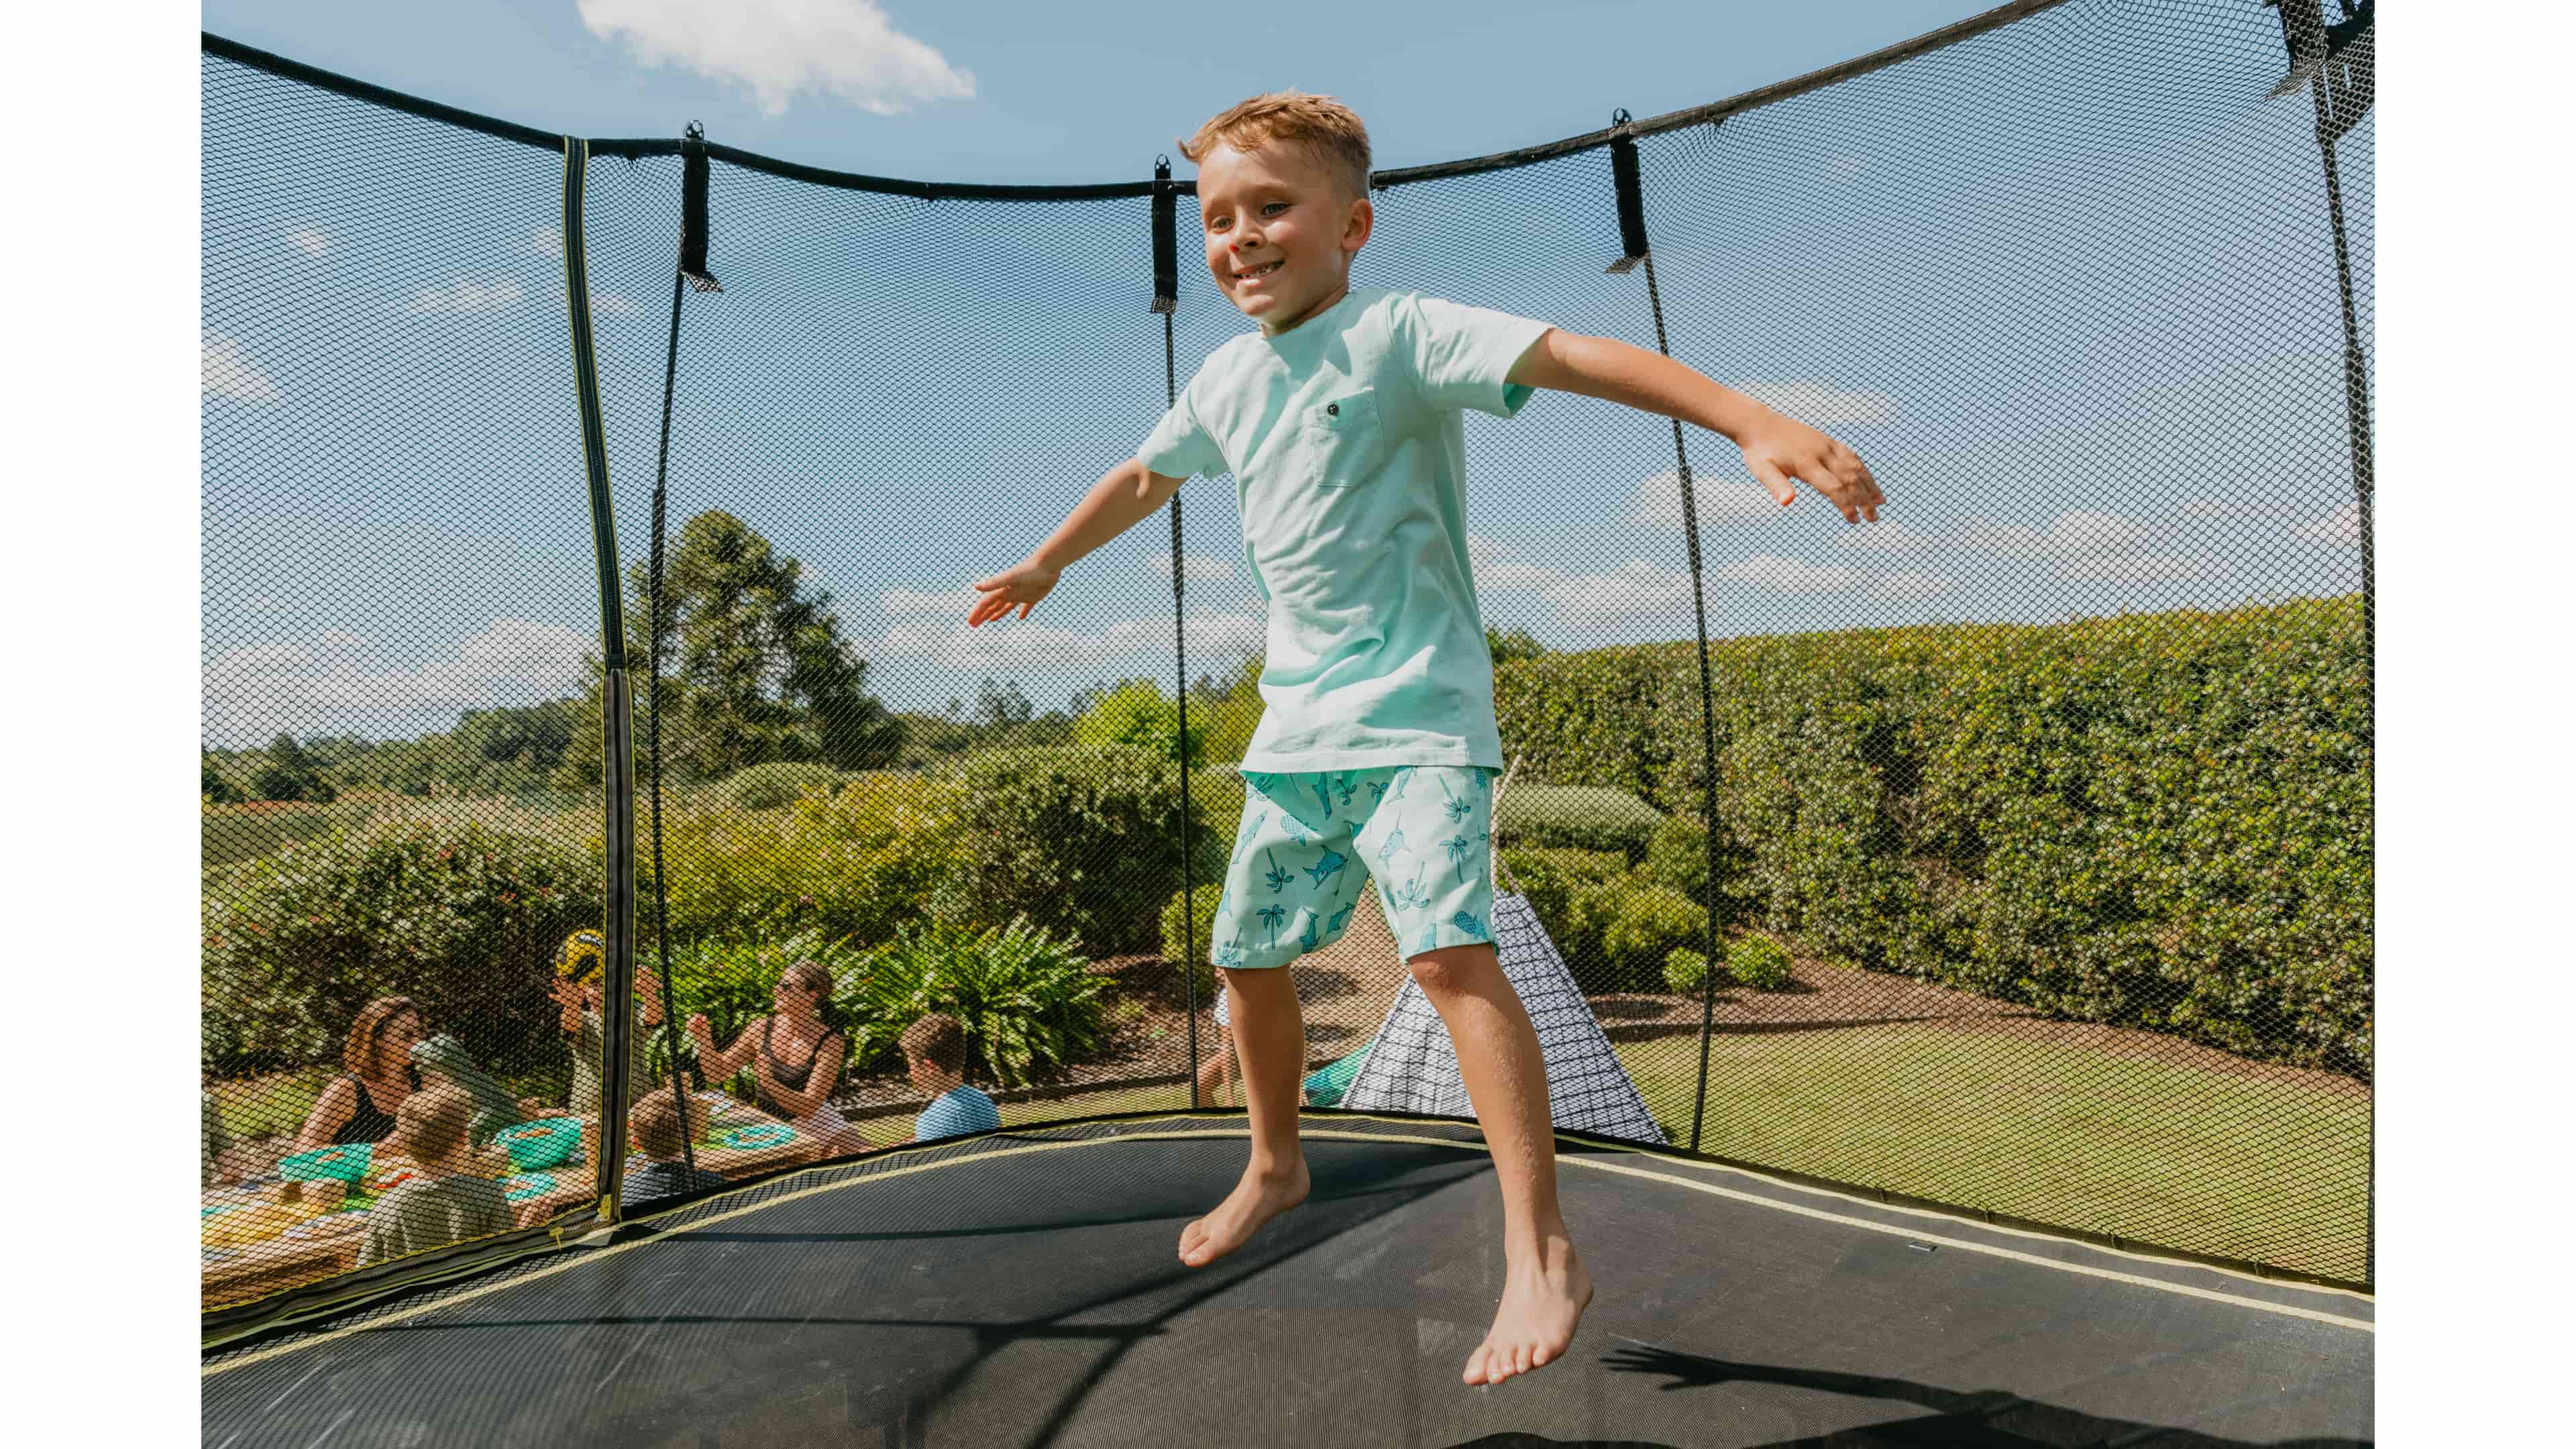 How to Stop Trampoline Squeaking | A Definitive Guide